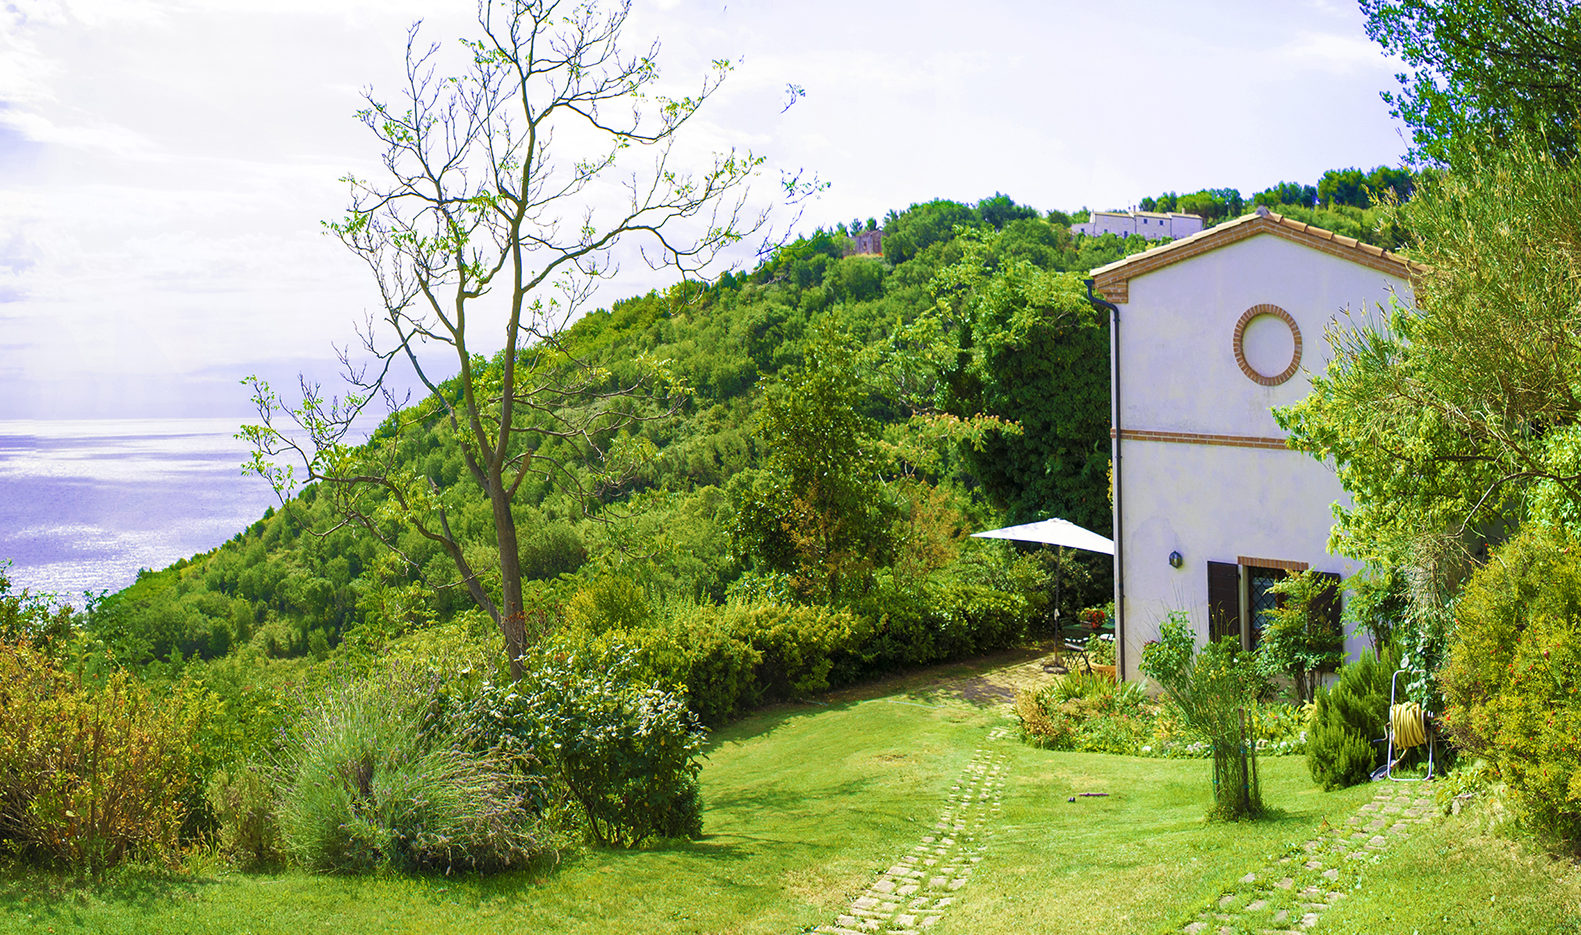 Wonderful sea view farmhouse surrounded by nature in the residential area of Ancona